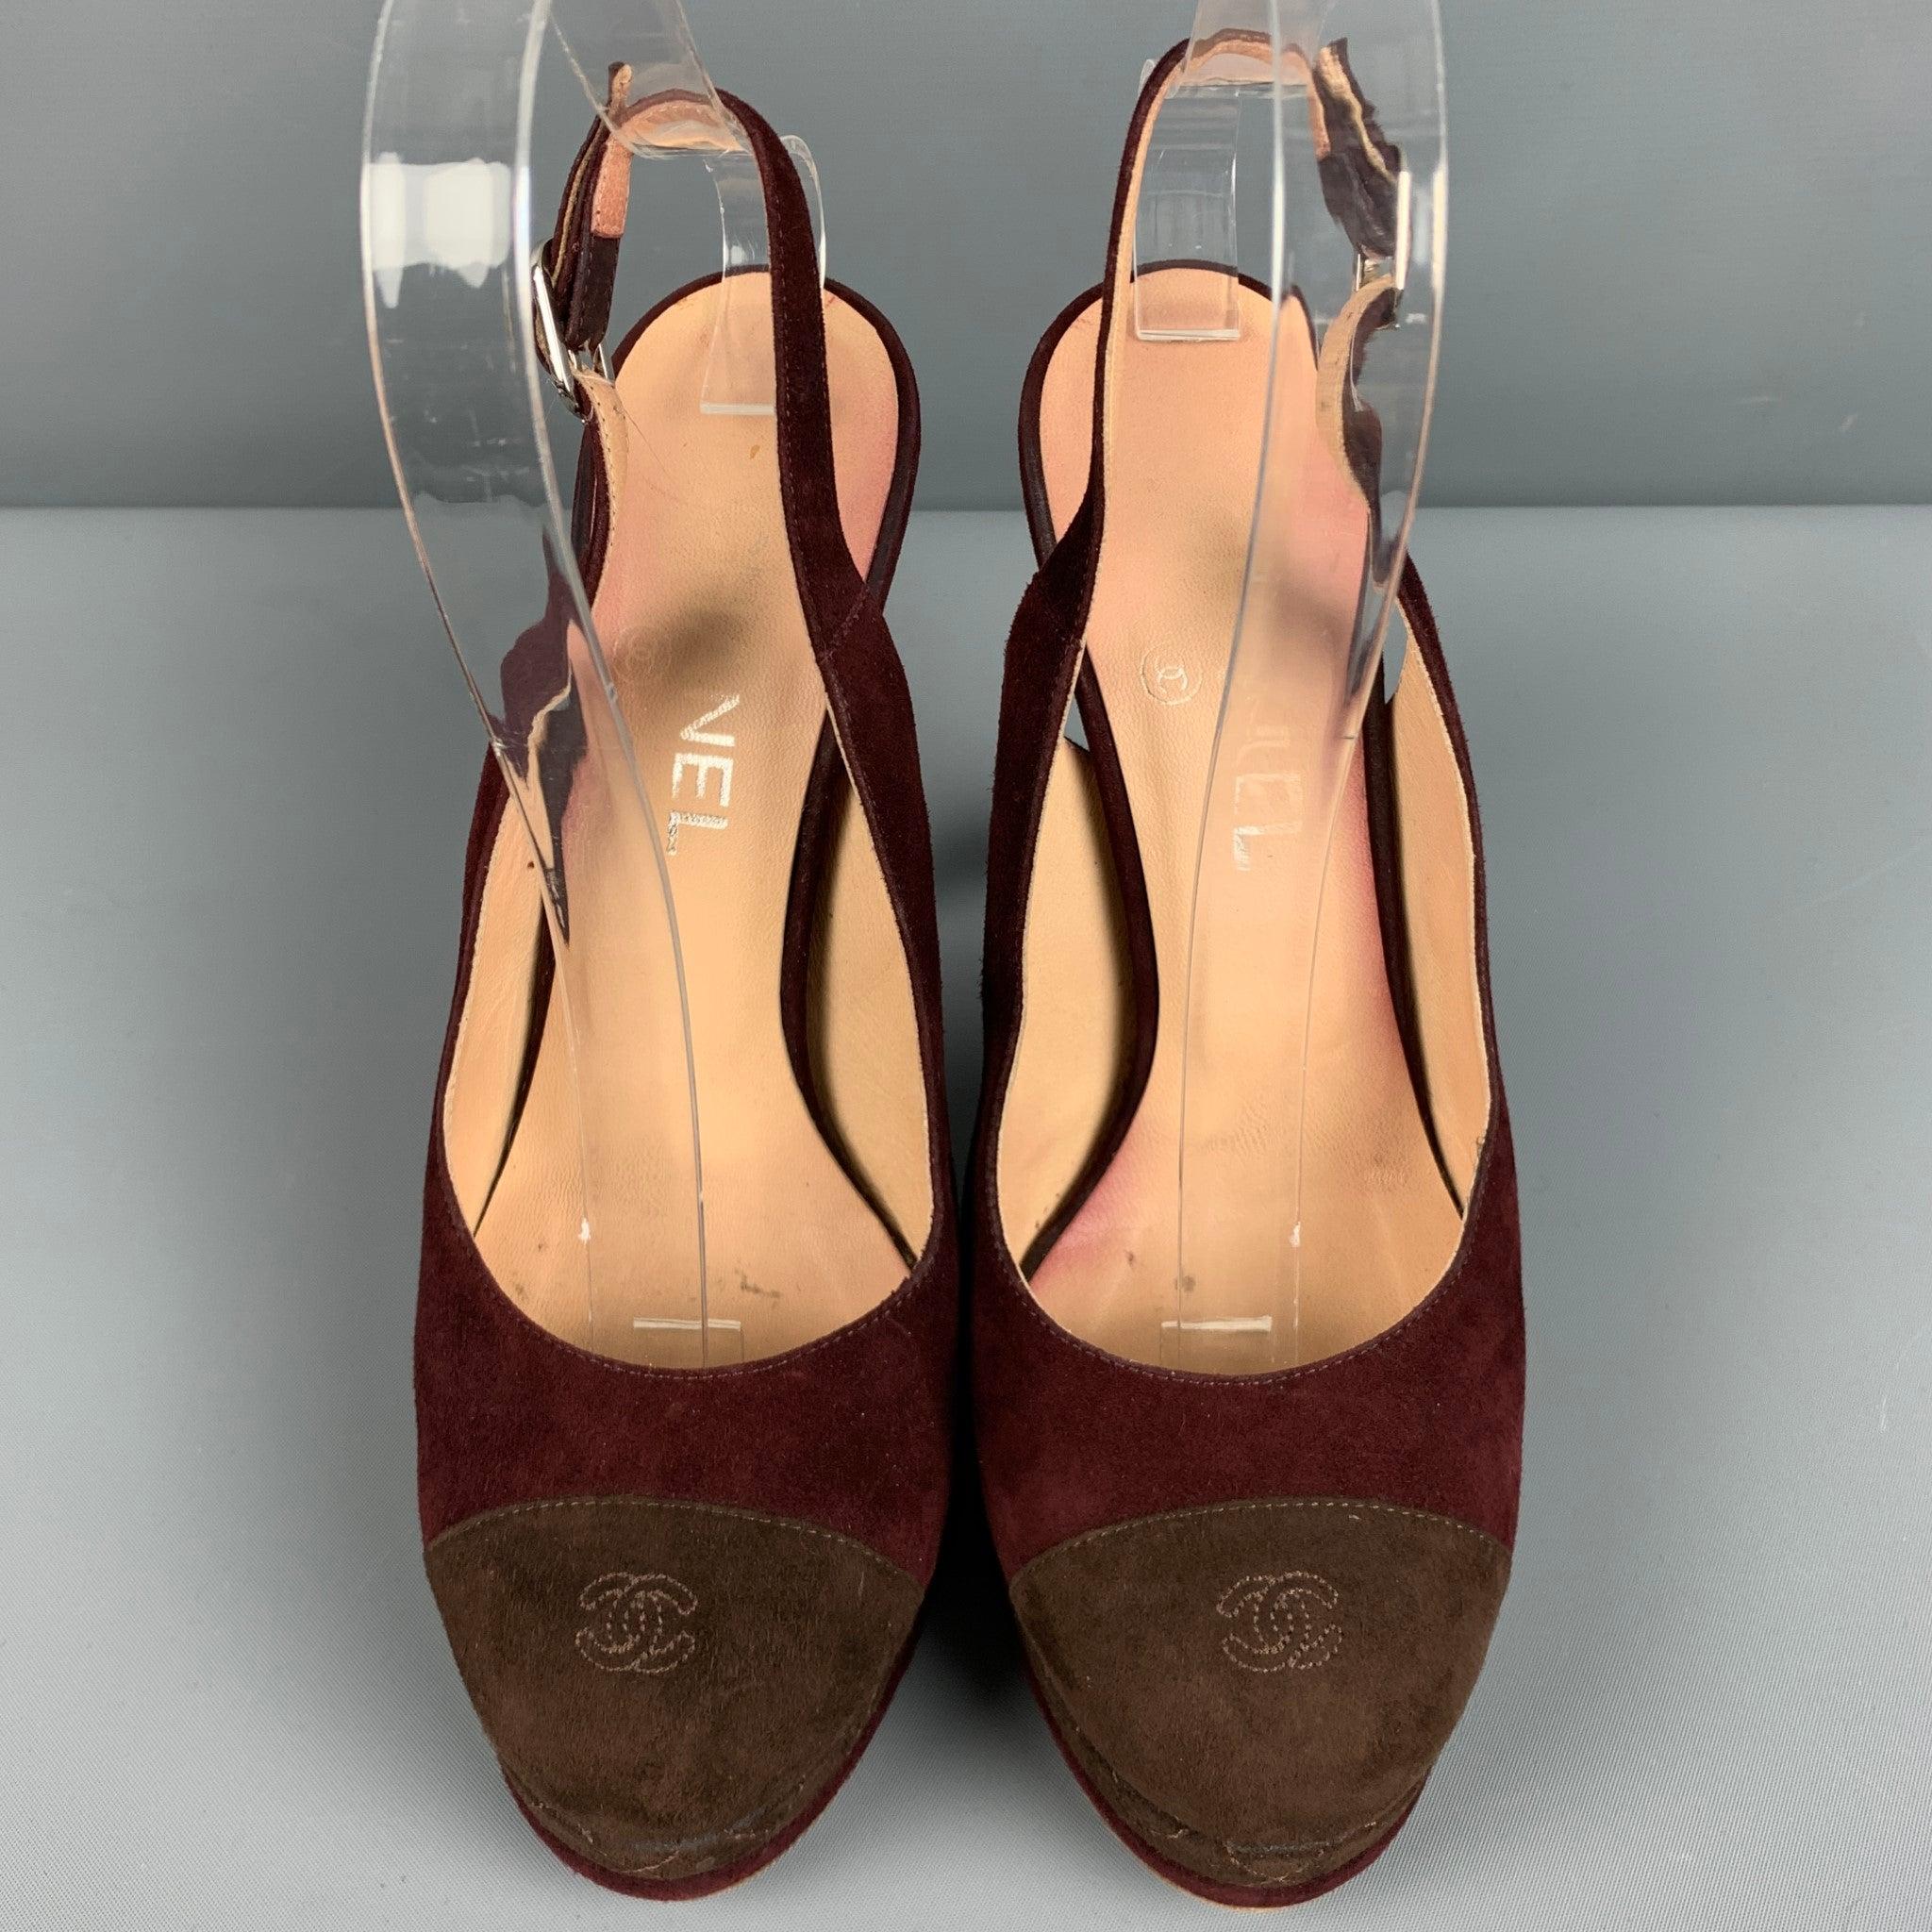 Women's CHANEL Size 7.5 Burgundy Brown Suede Slingback Pumps For Sale